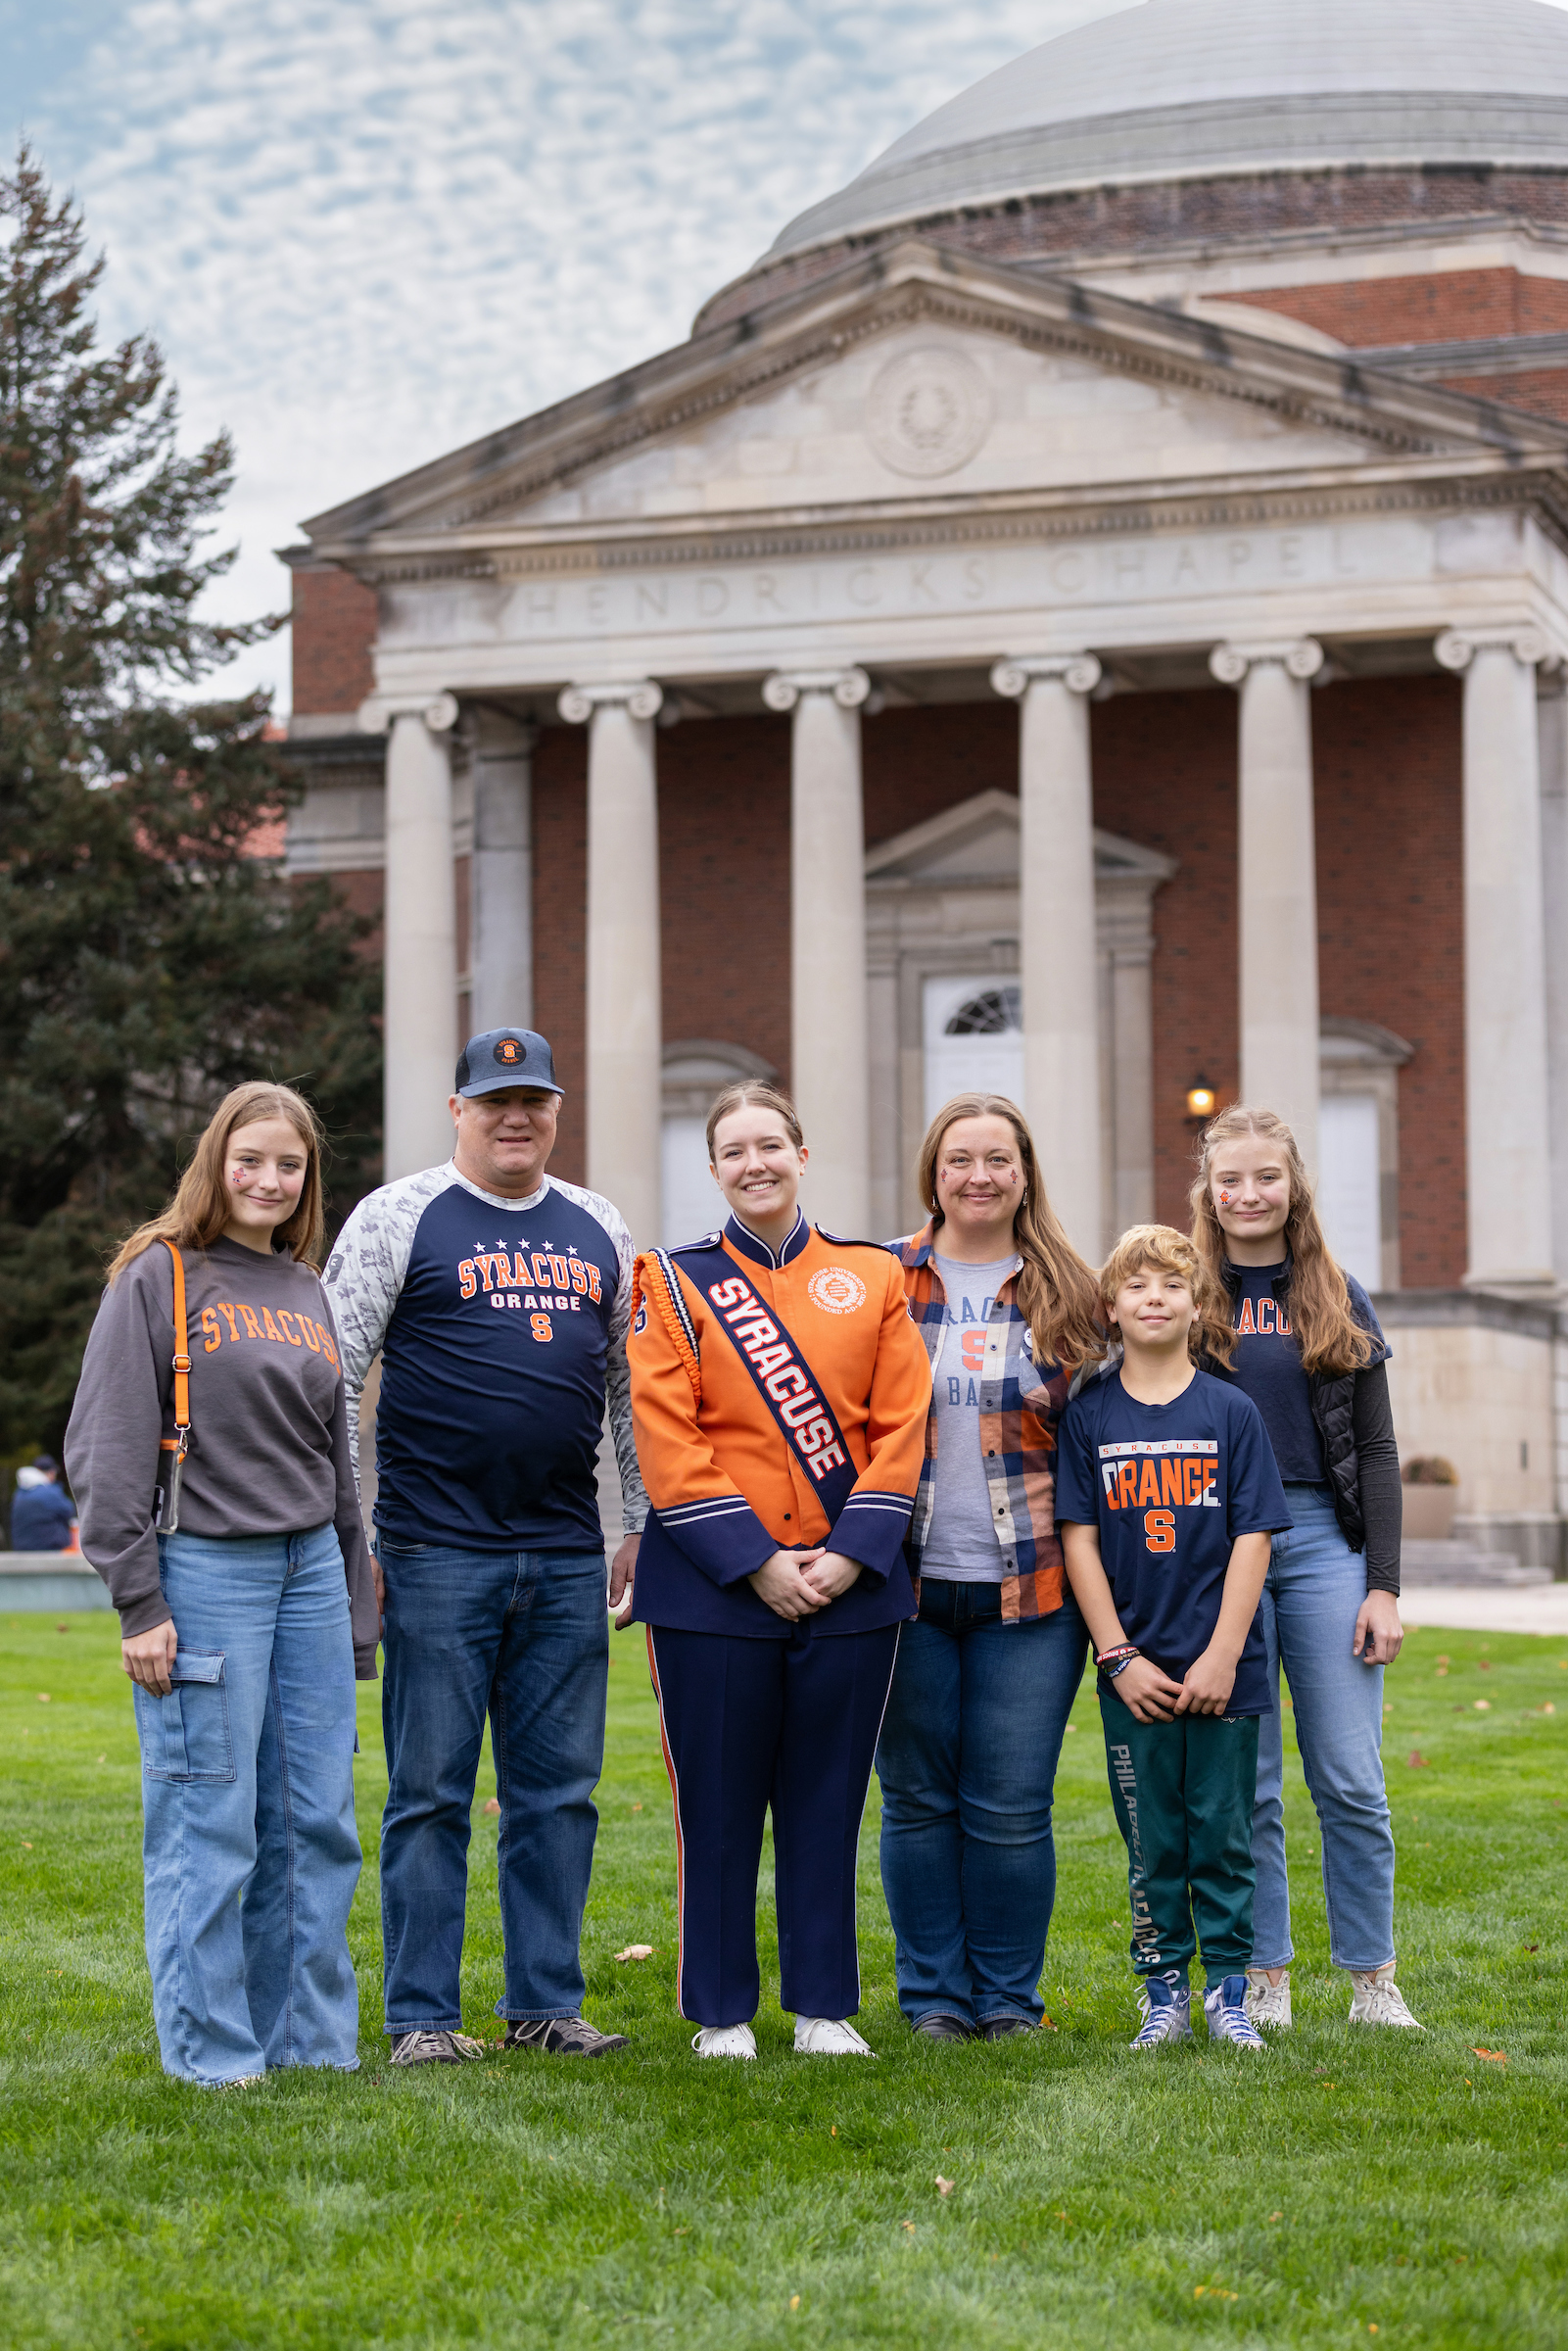 A family of six individuals pose together outside of Hendricks Chapel during the Family Weekend tailgate